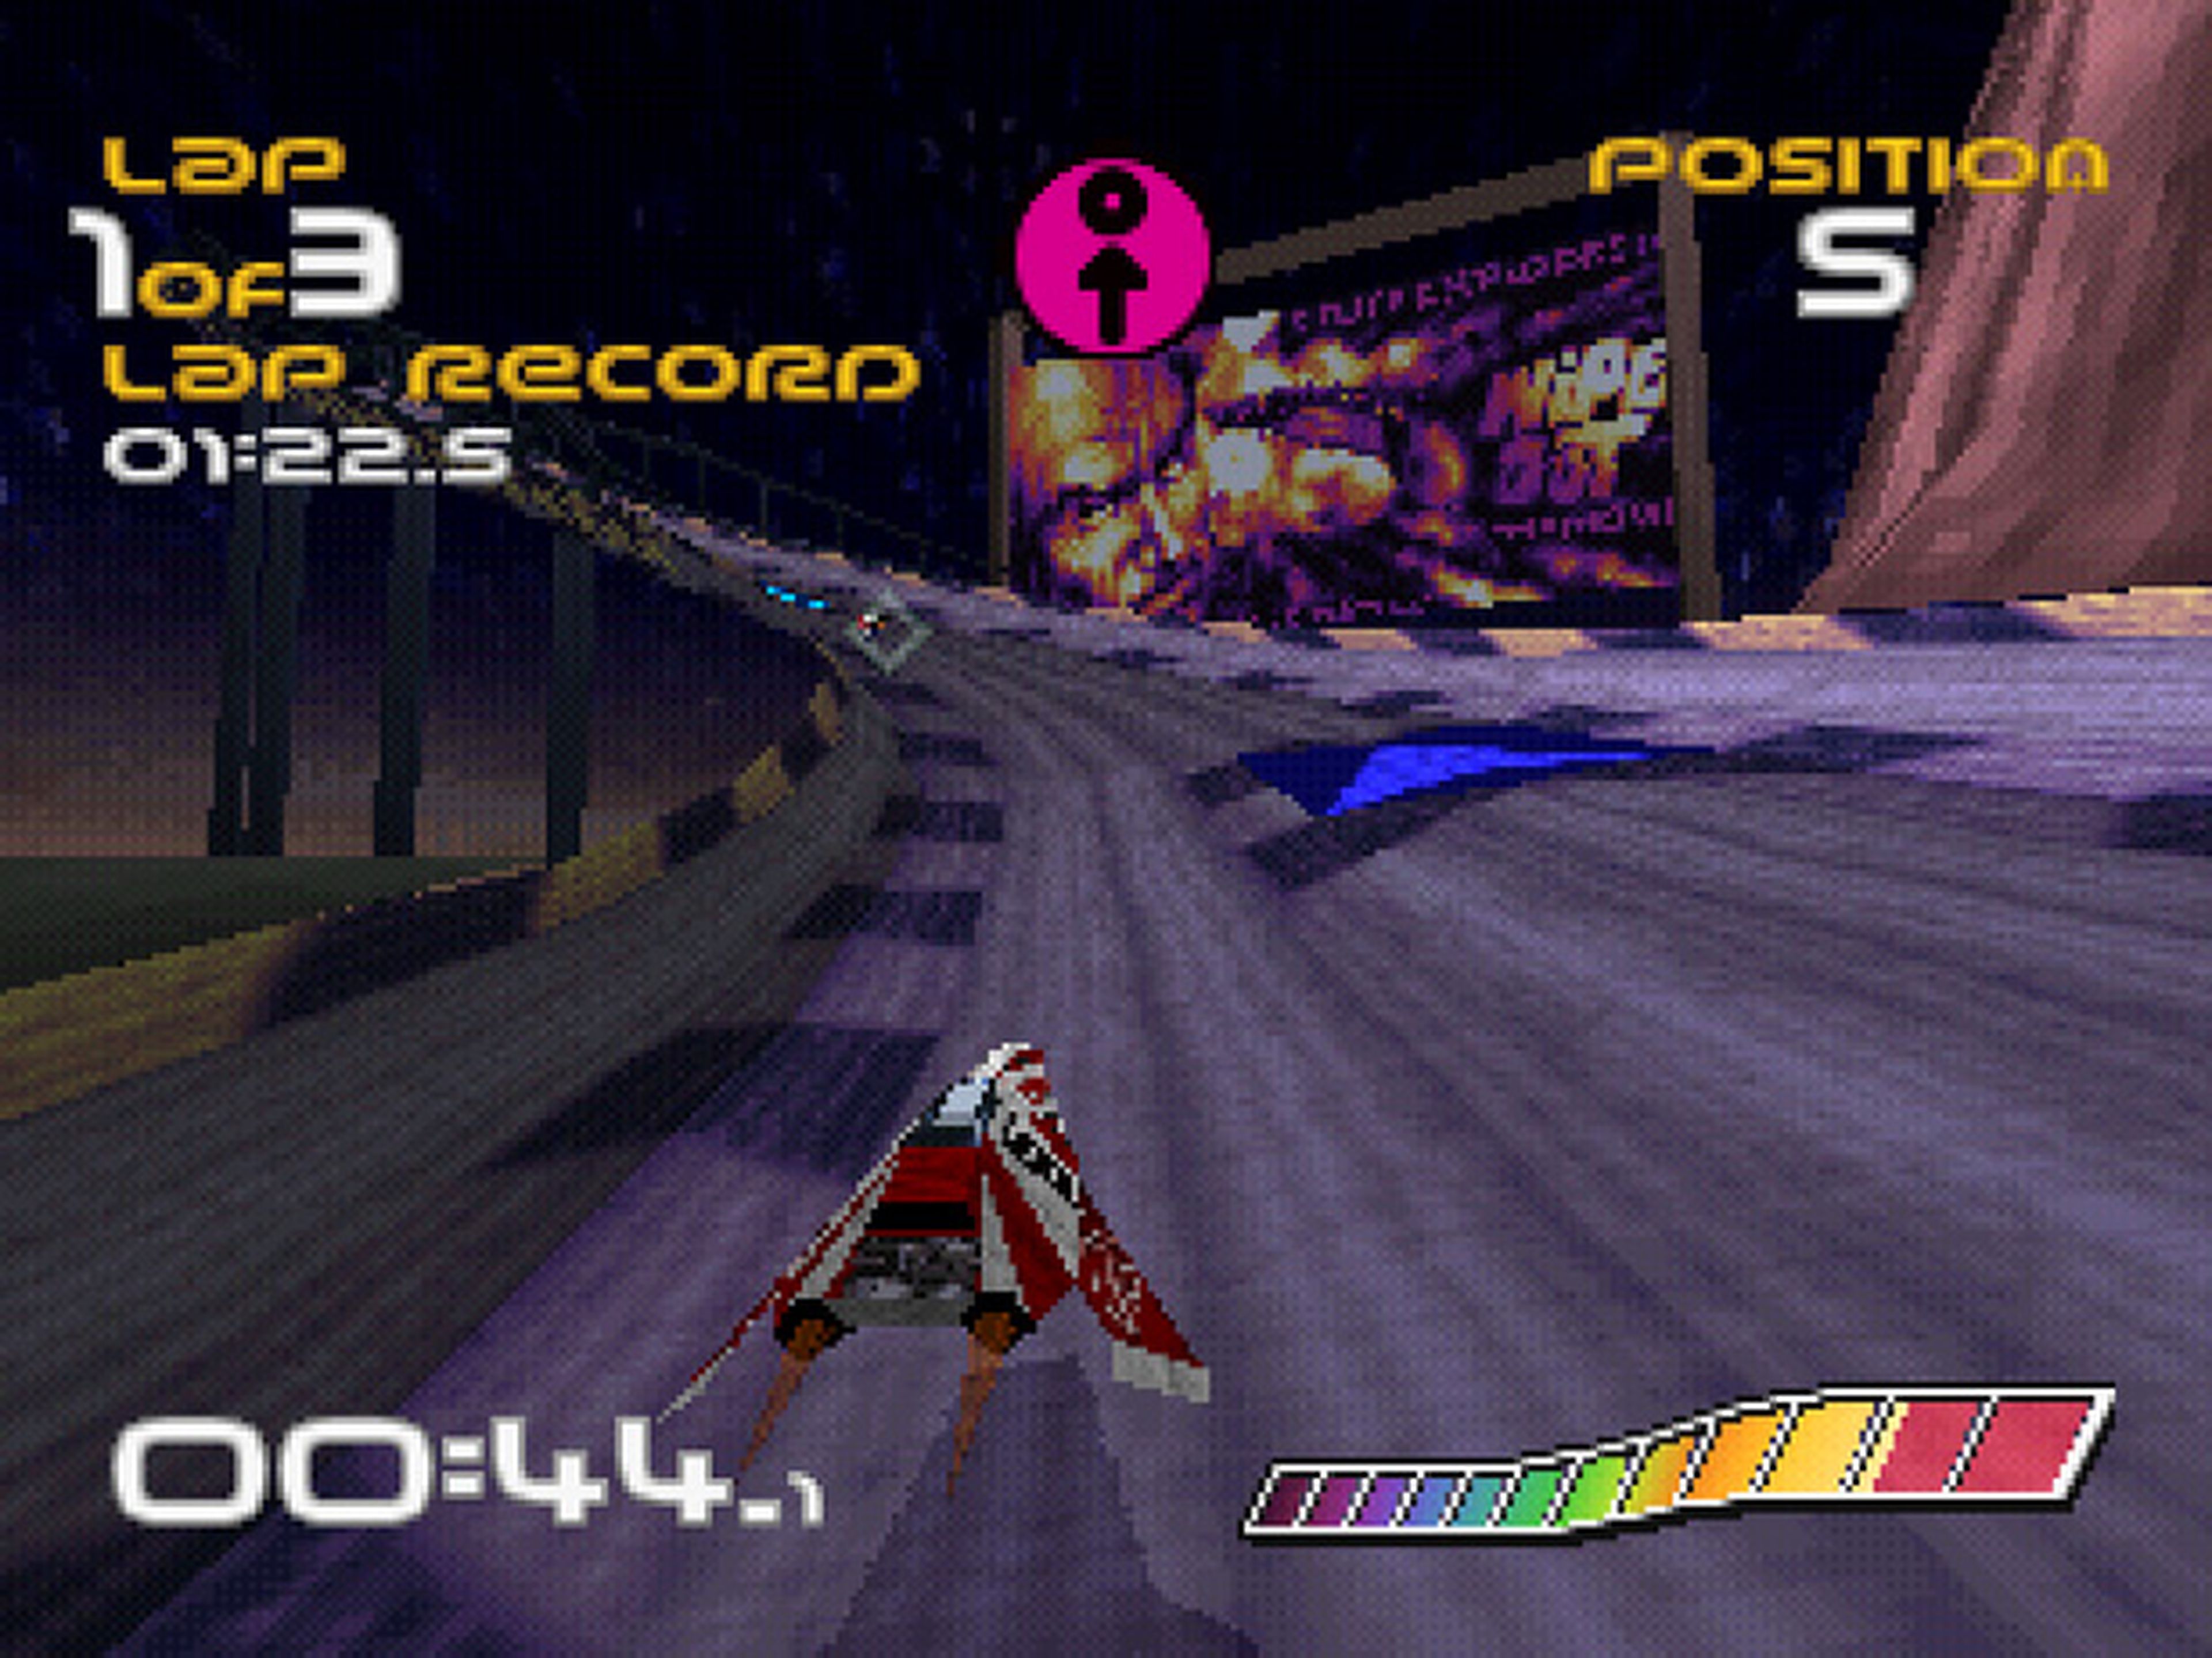 Hobby Consolas, hace 20 años: WipeOut